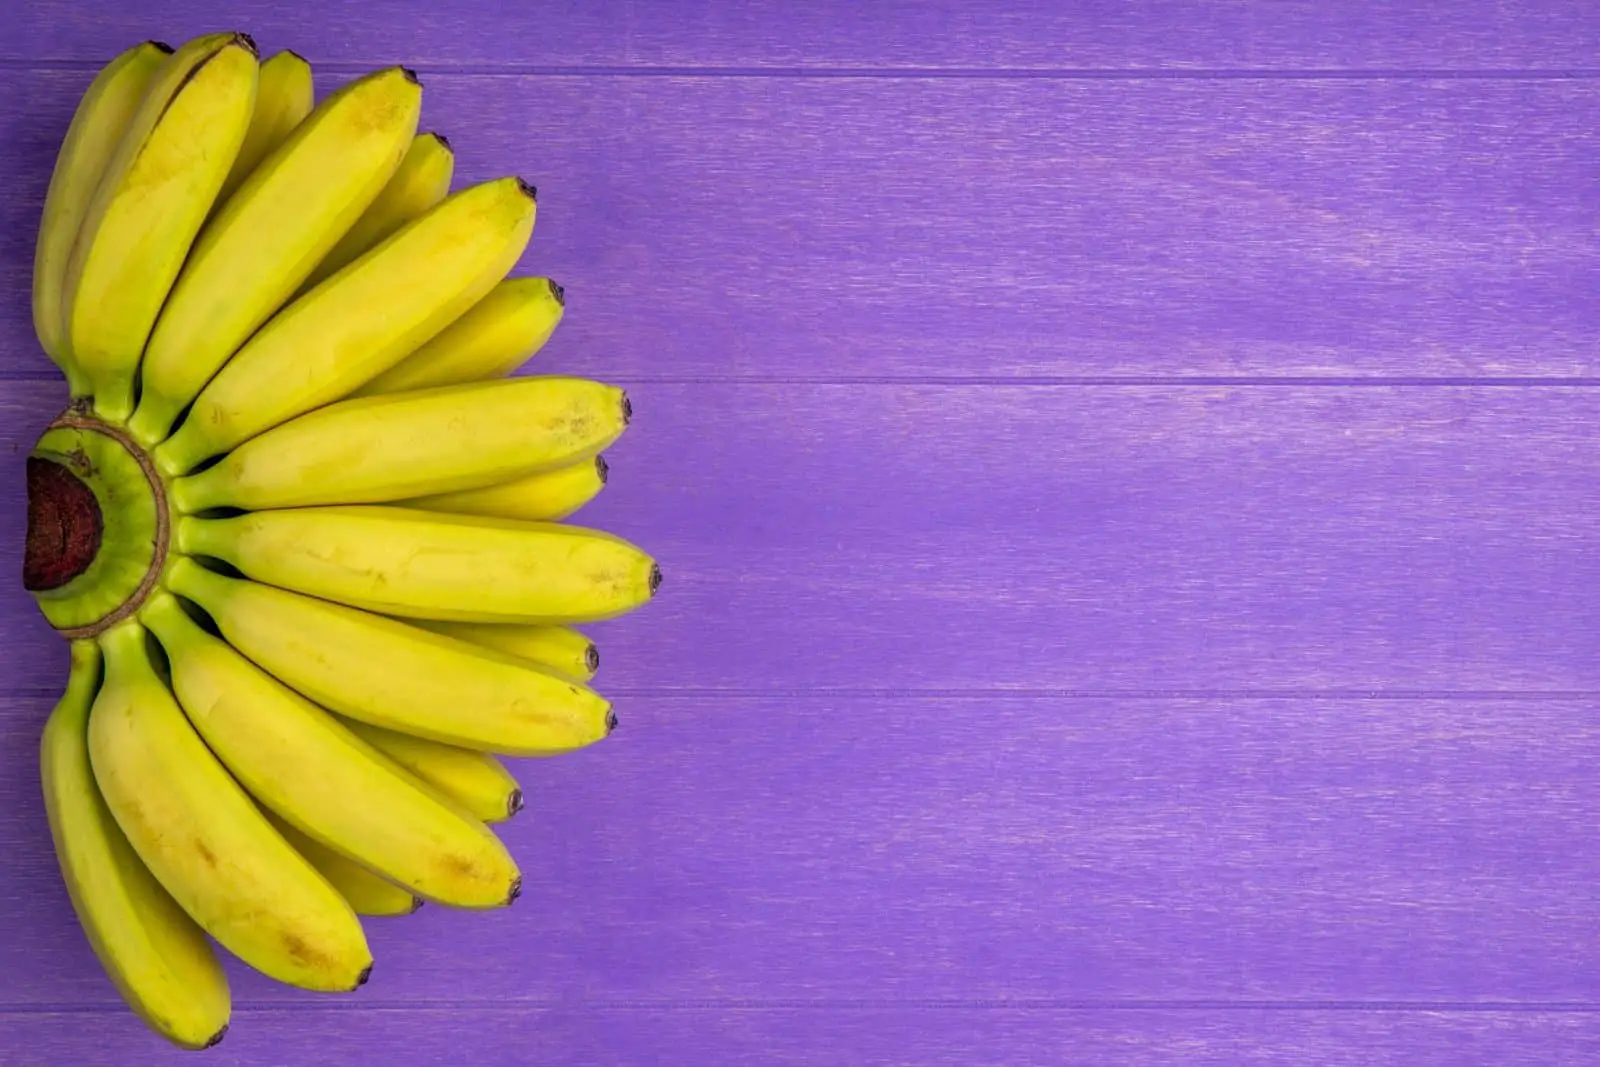 Are bananas high in histamine?